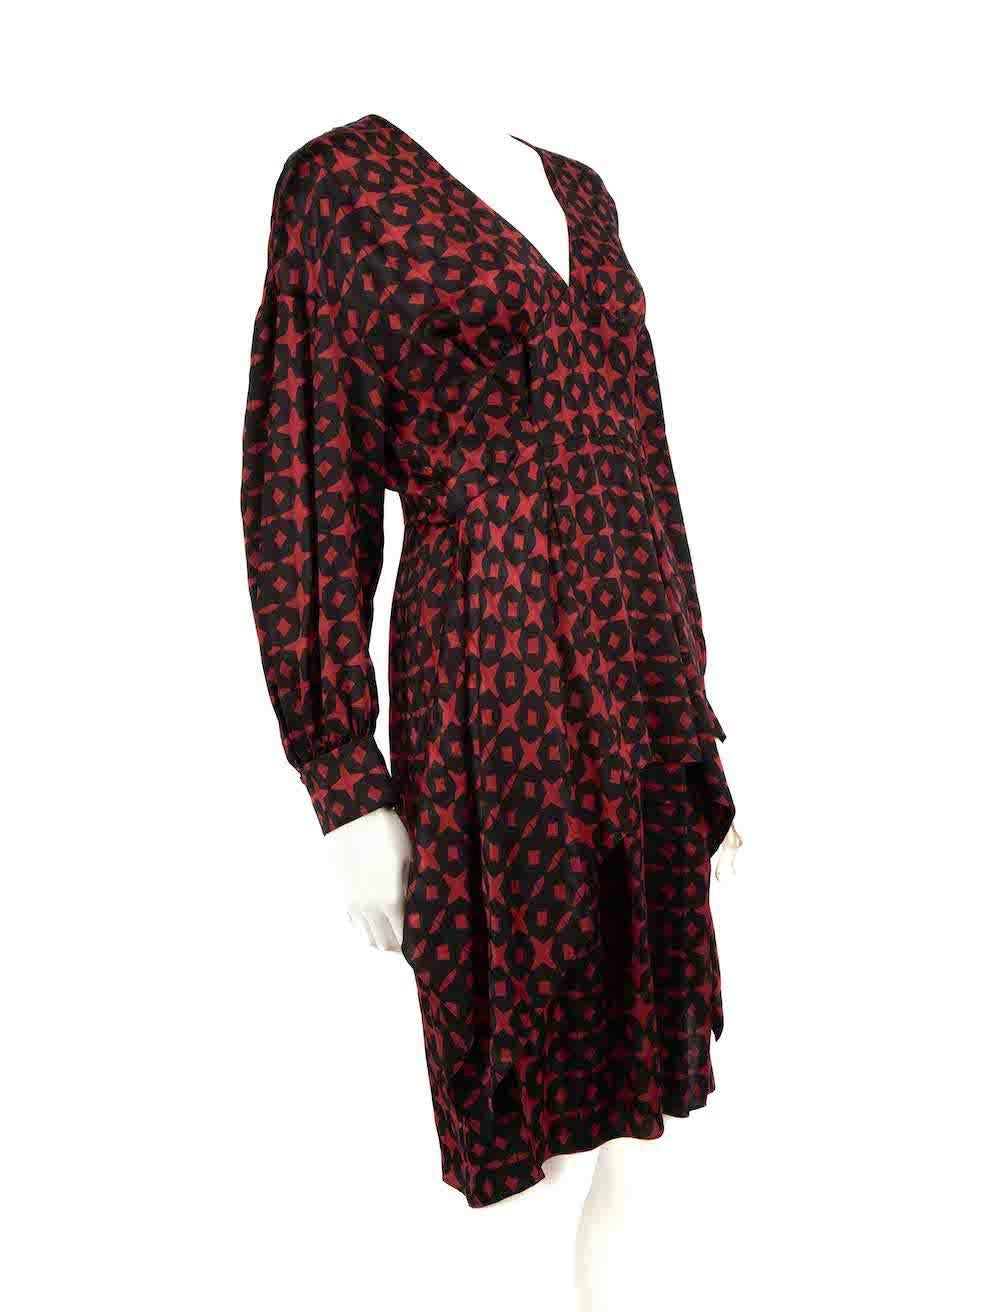 CONDITION is Very good. Hardly any visible wear to dress is evident on this used Fendi designer resale item.
 
 
 
 Details
 
 
 Red and black
 
 Silk
 
 Dress
 
 Abstract pattern
 
 Long sleeves
 
 V-neck
 
 Knee length
 
 Back zip an hook